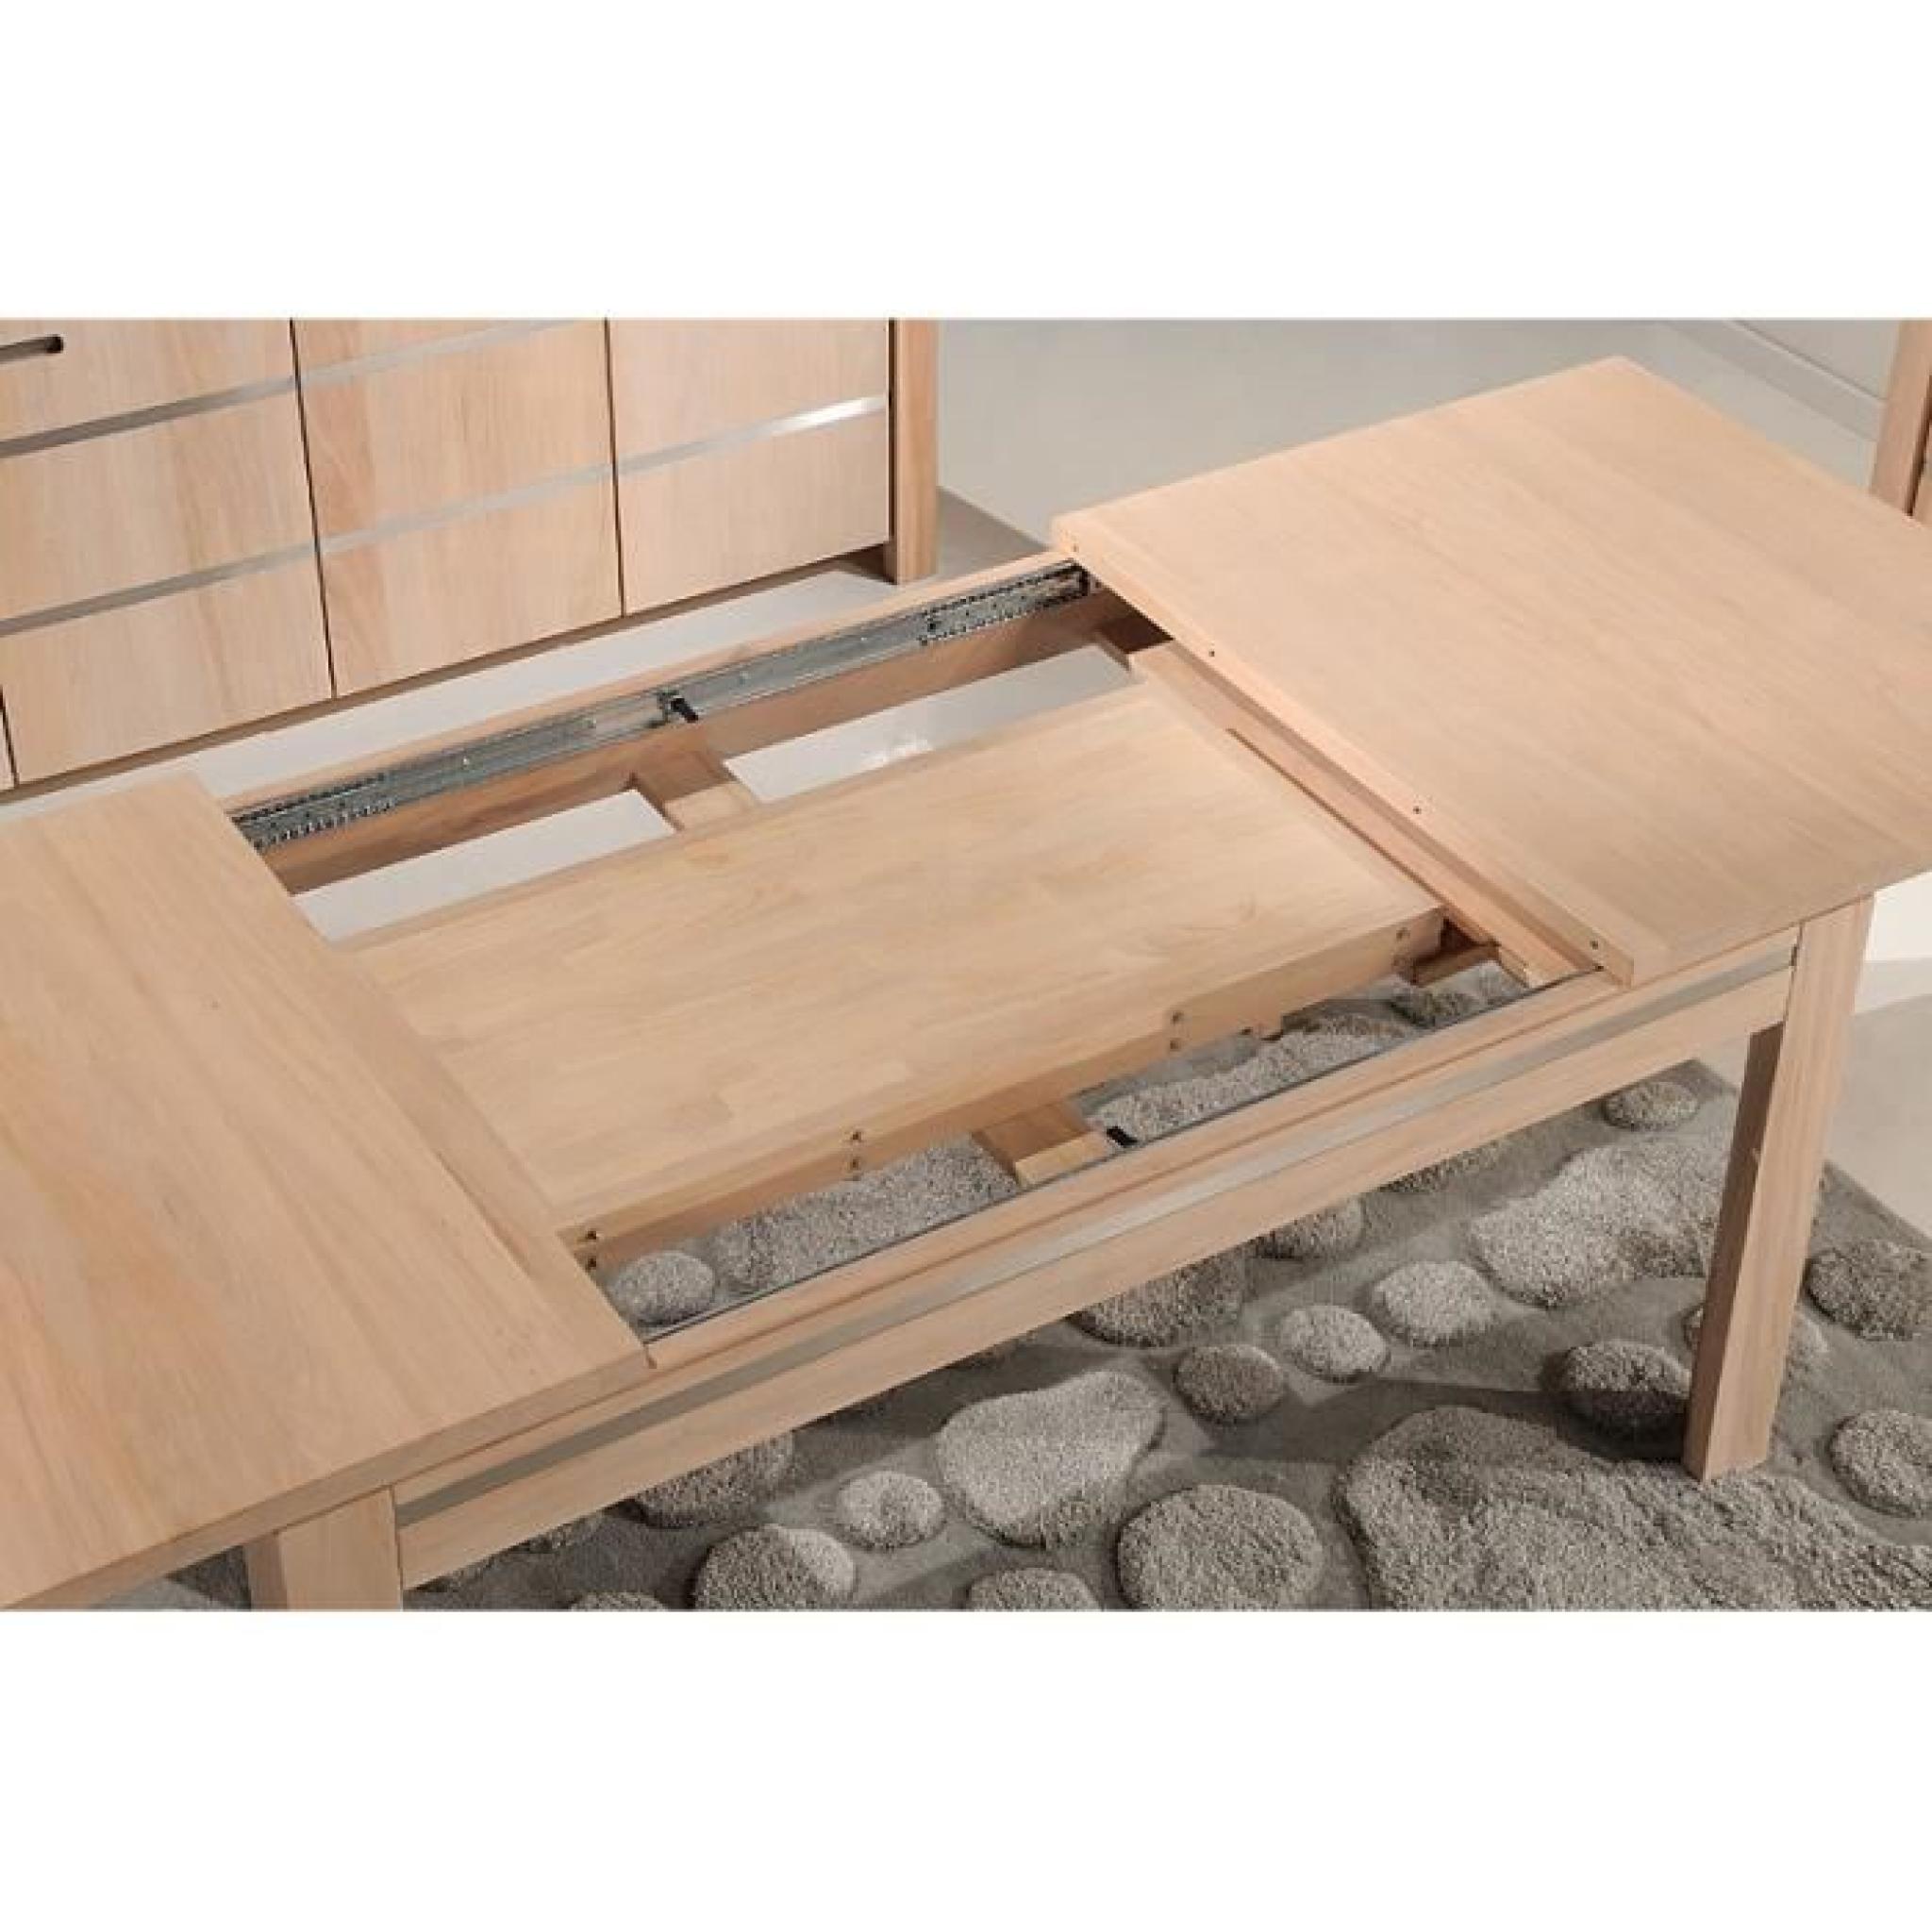 Table OPALE 180/95 ORME MASSIF-INOX (Orme) pas cher